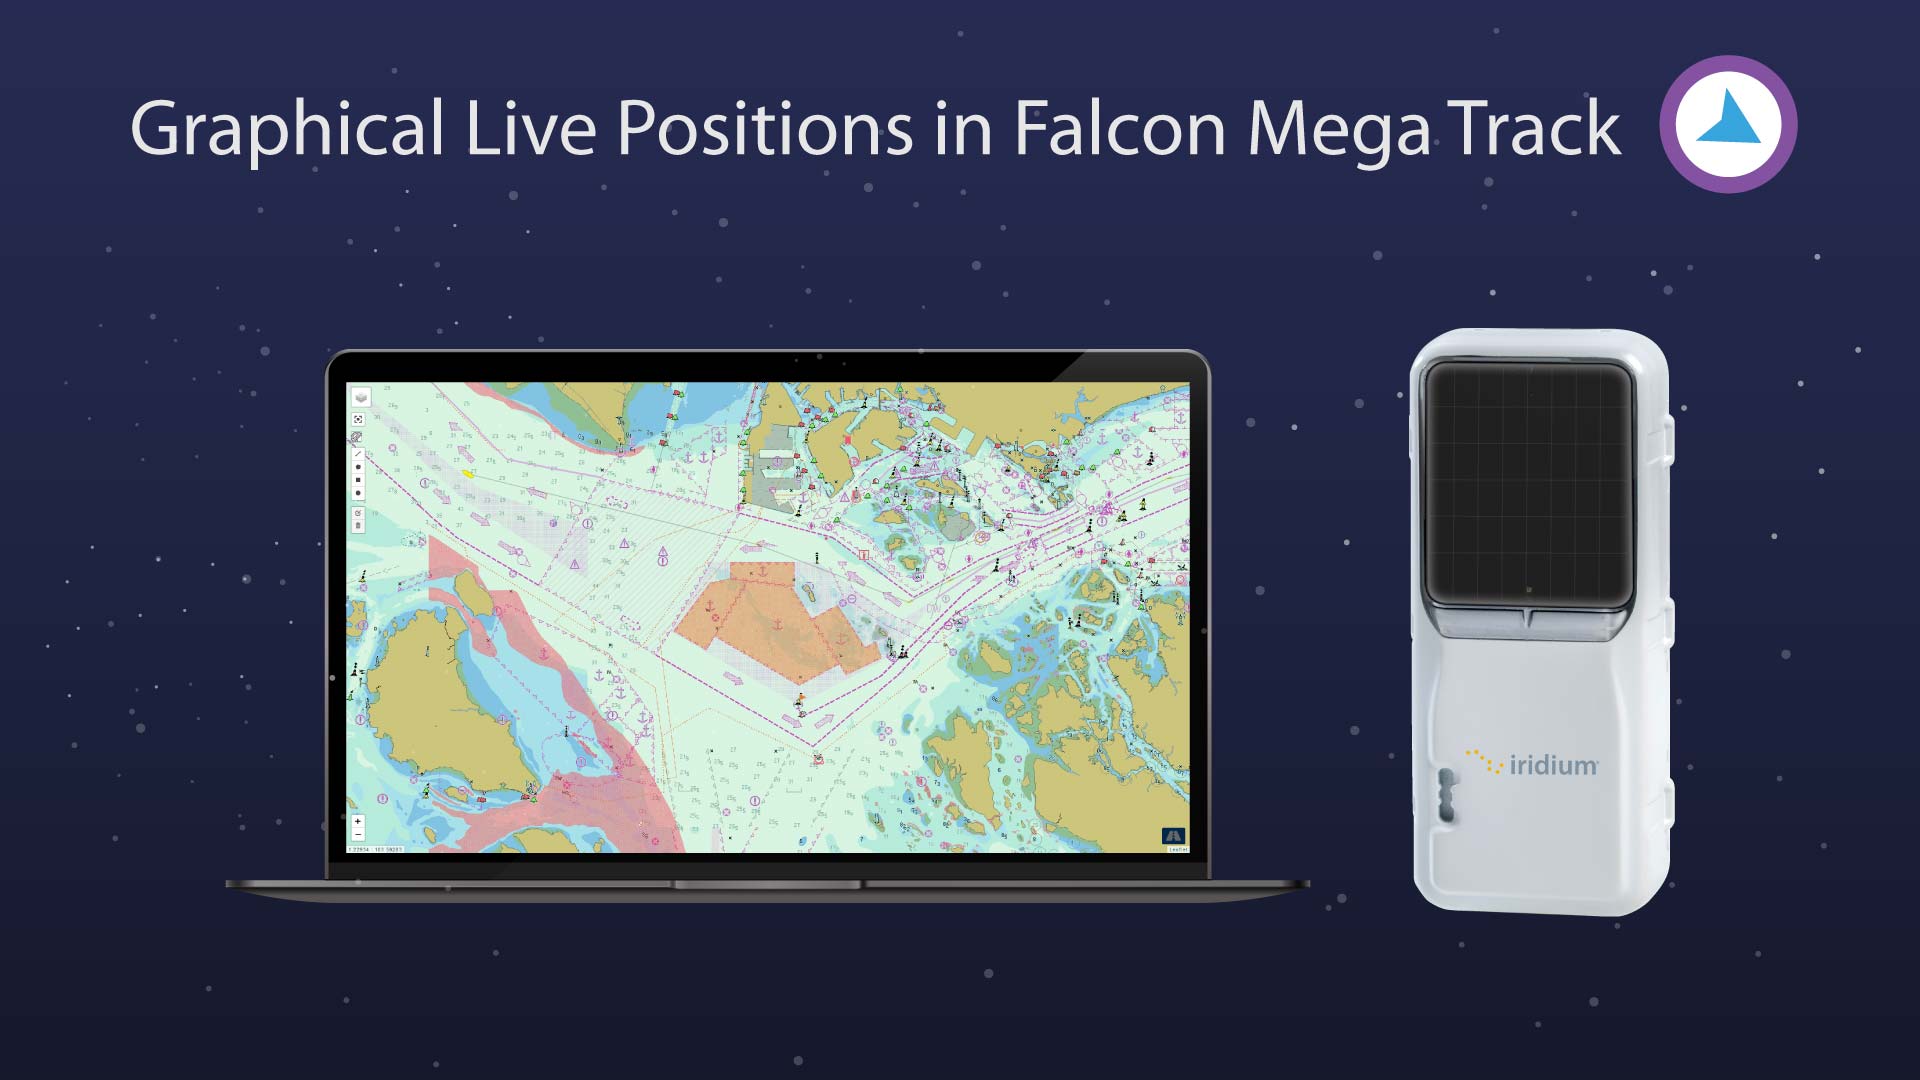 Through Iridium Edge Solar, you can get the Live Tracking Positions in Falcon Mega Track, Vessel Tracking Platform developed by Falcon Mega Solutions.